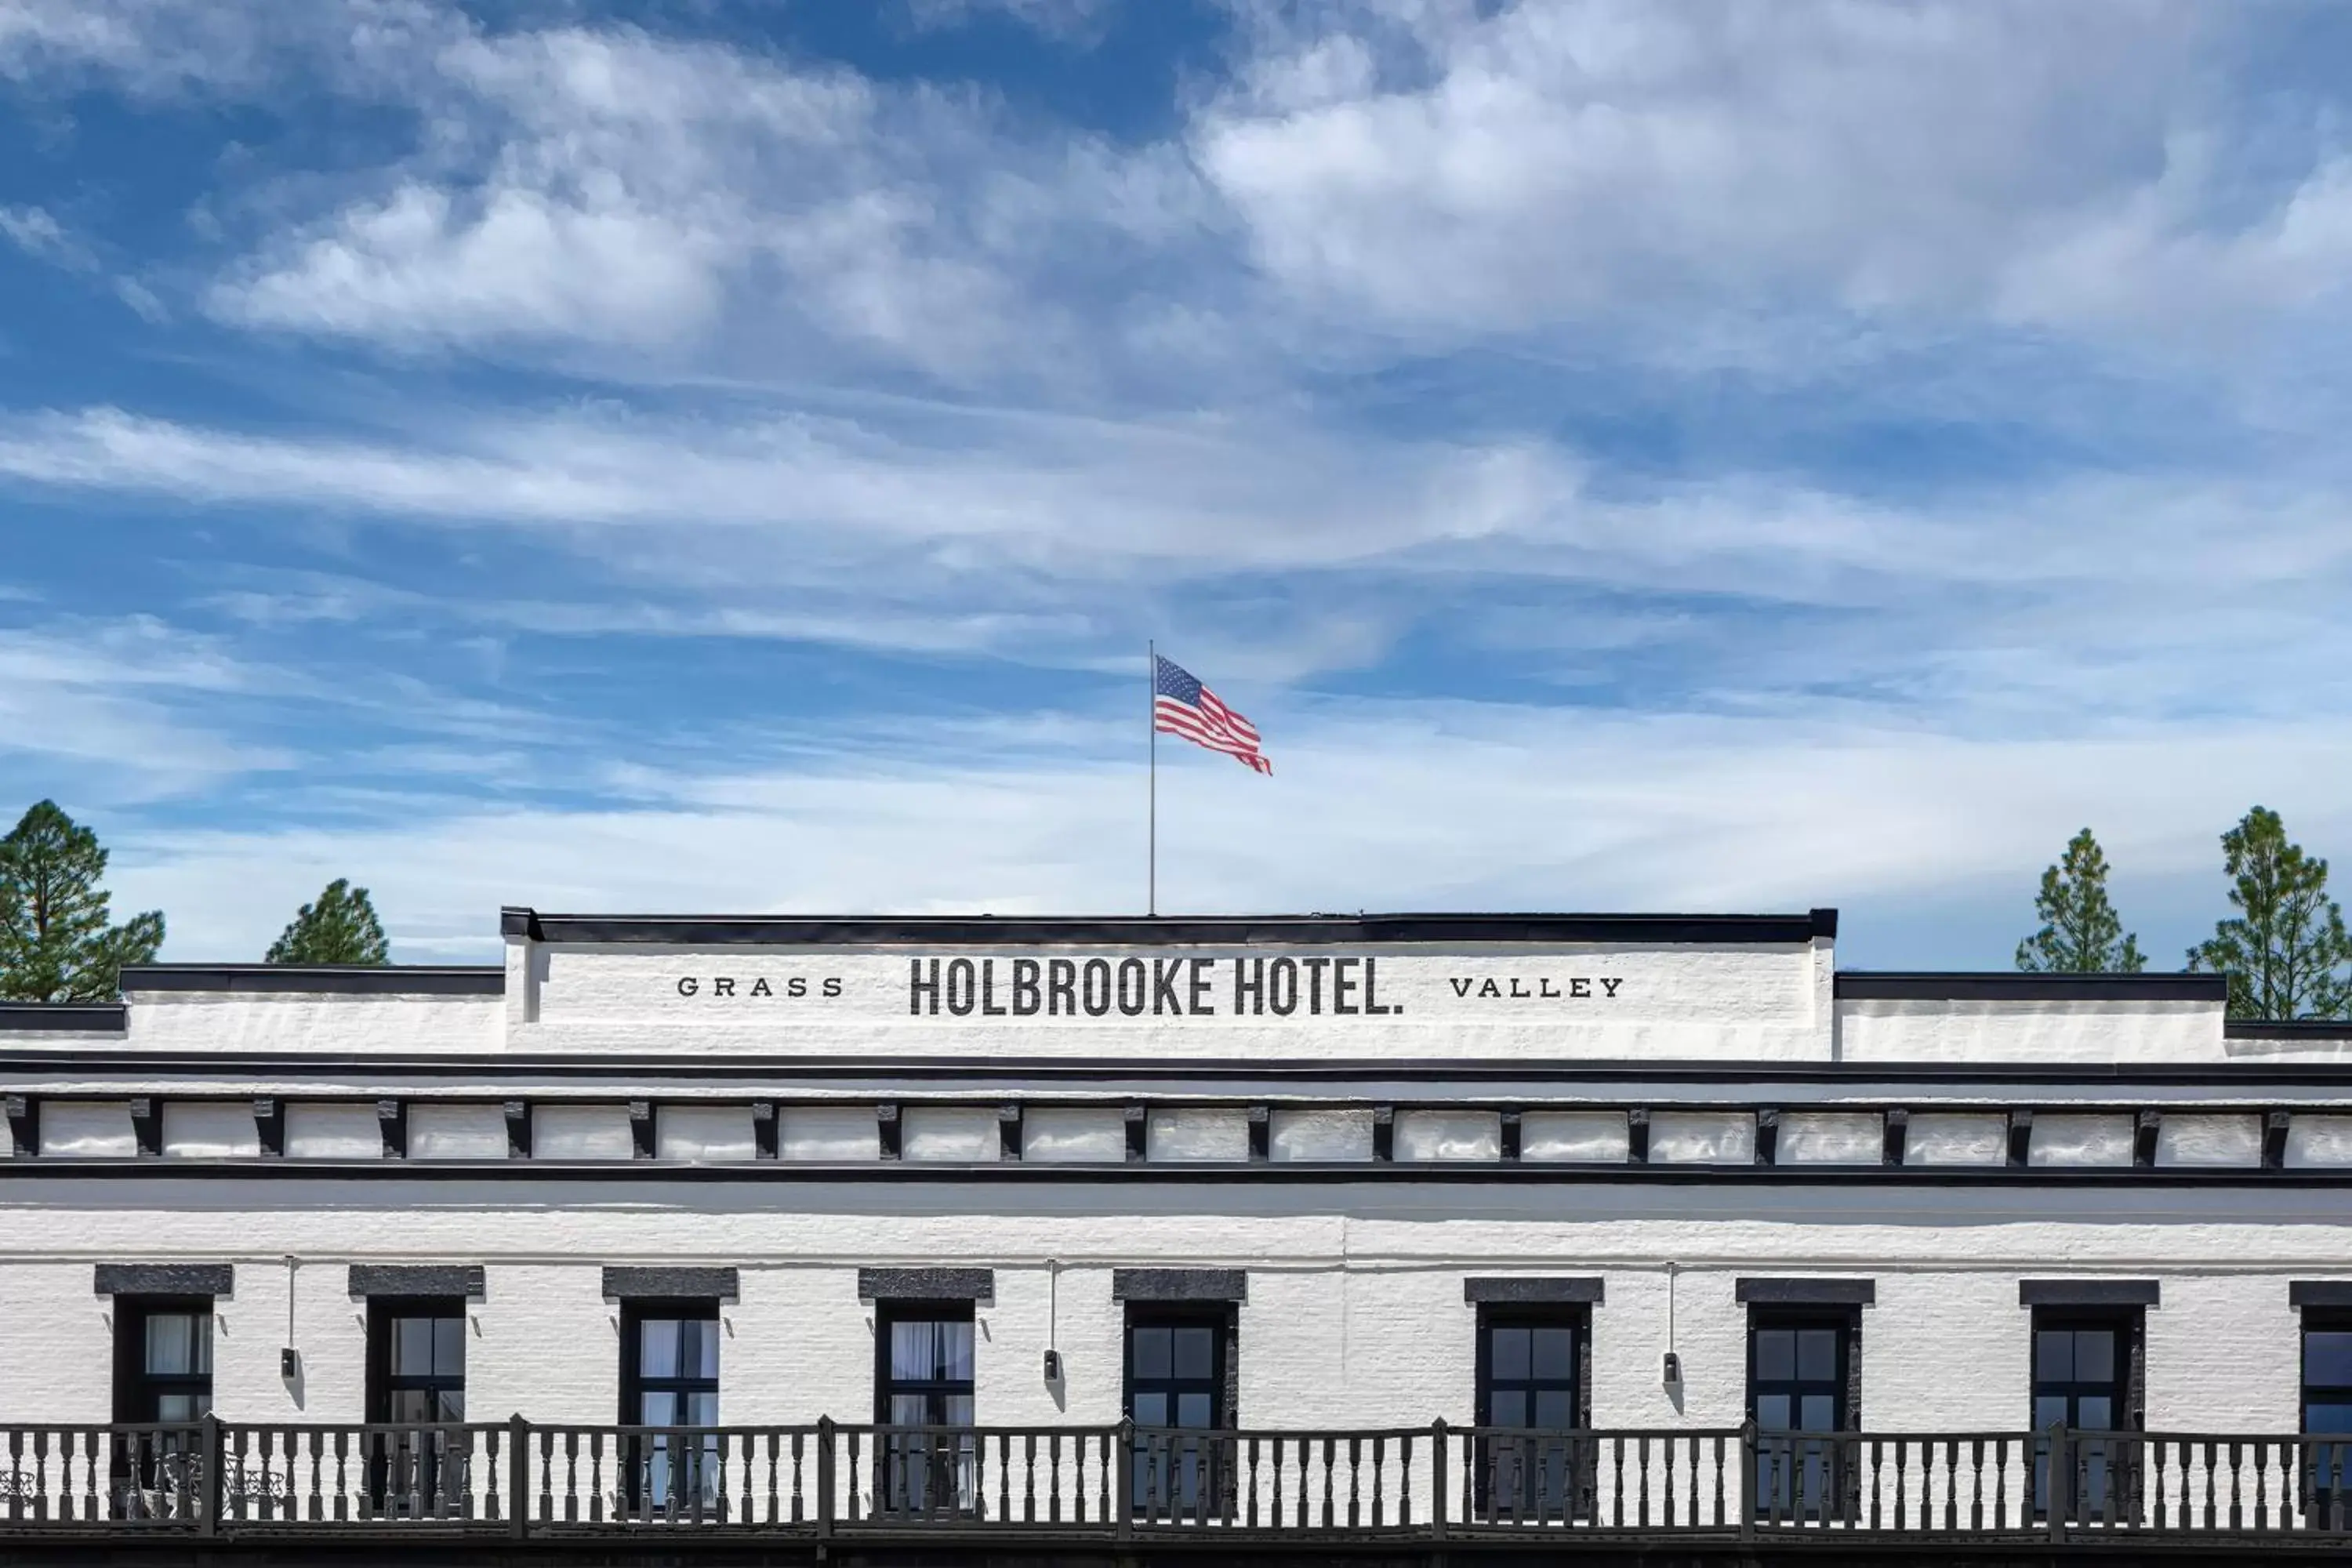 Property building in The Holbrooke Hotel